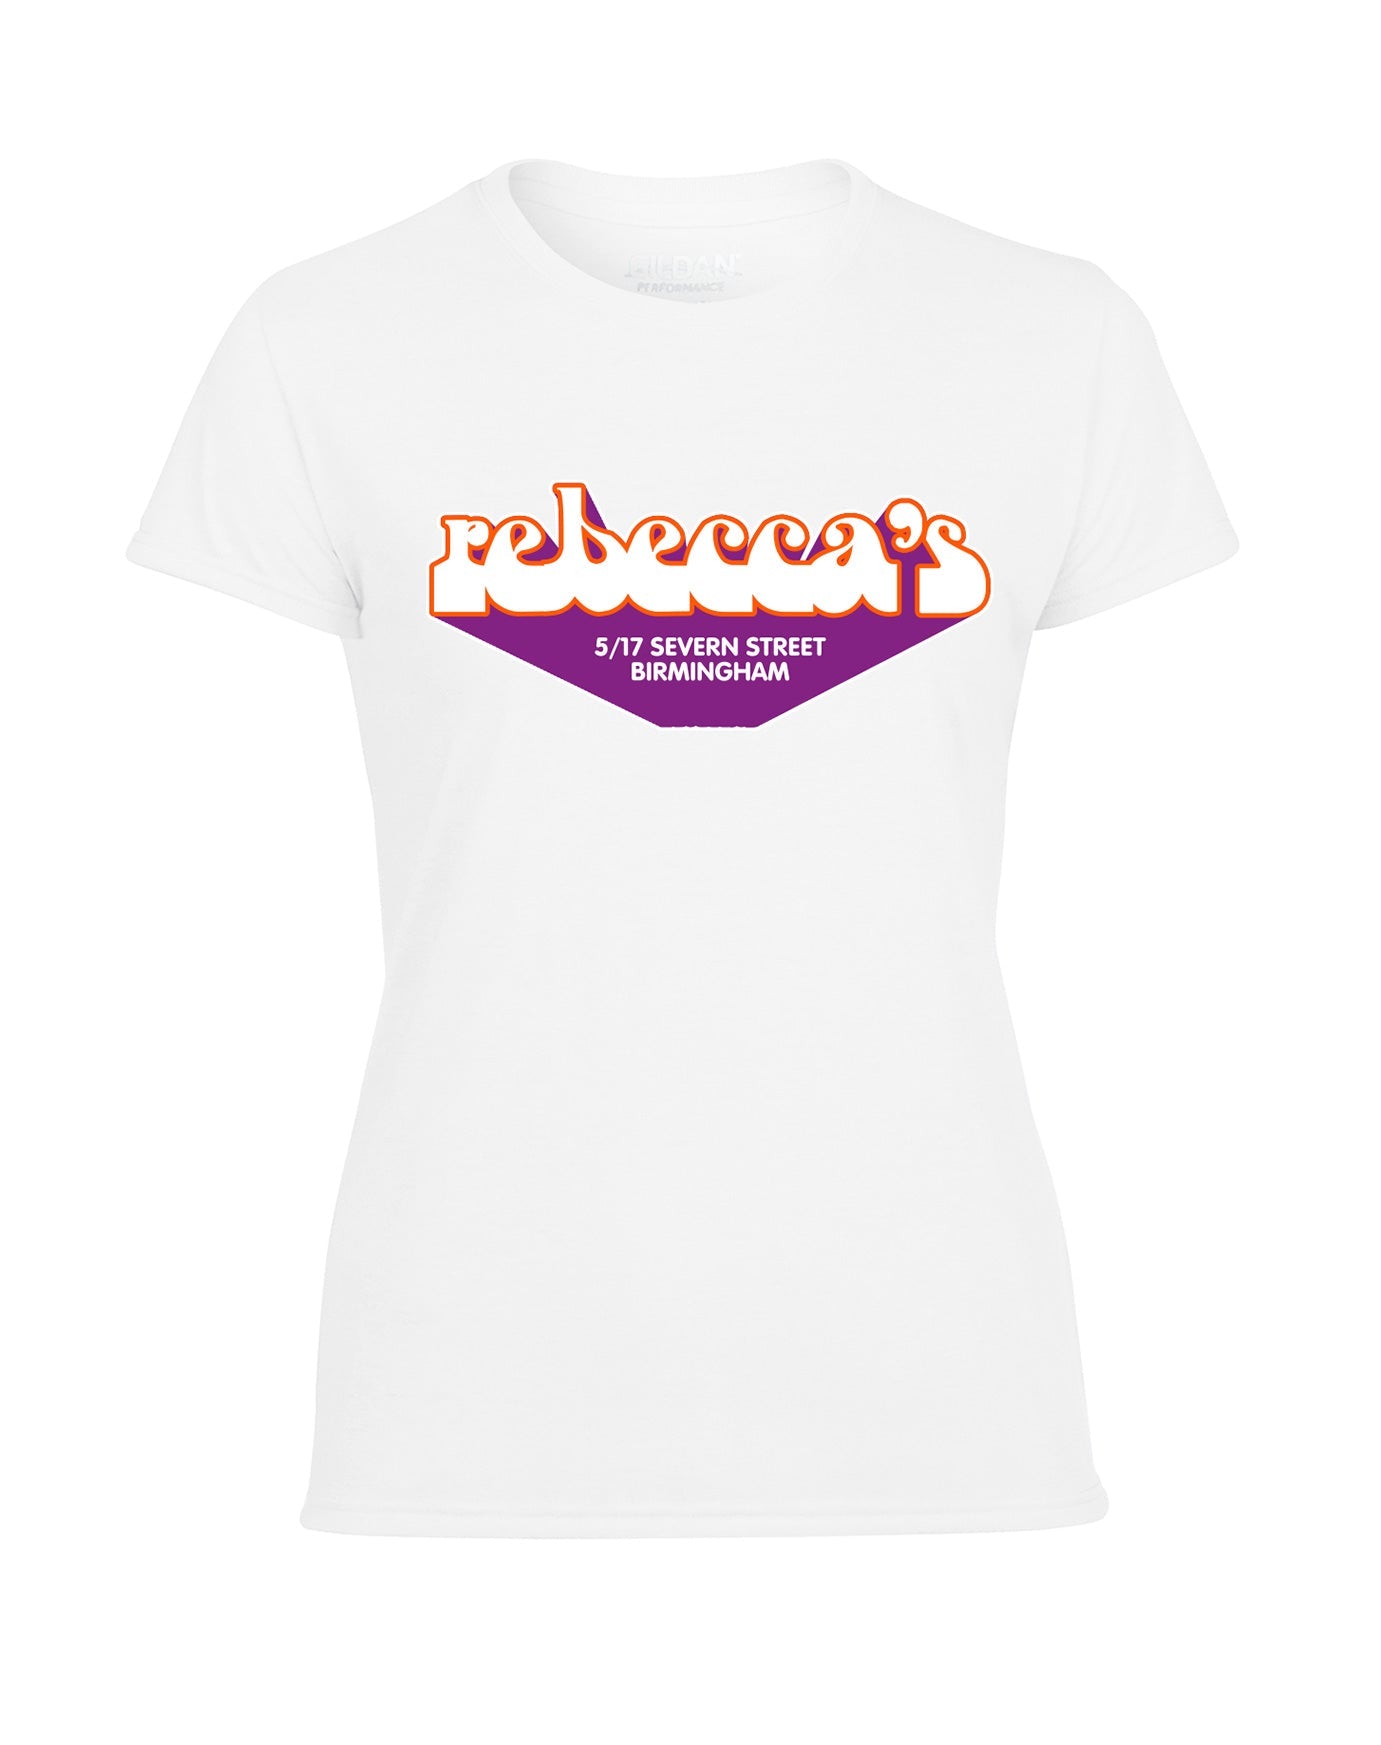 Rebecca's ladies fit T-shirt - various colours - Dirty Stop Outs